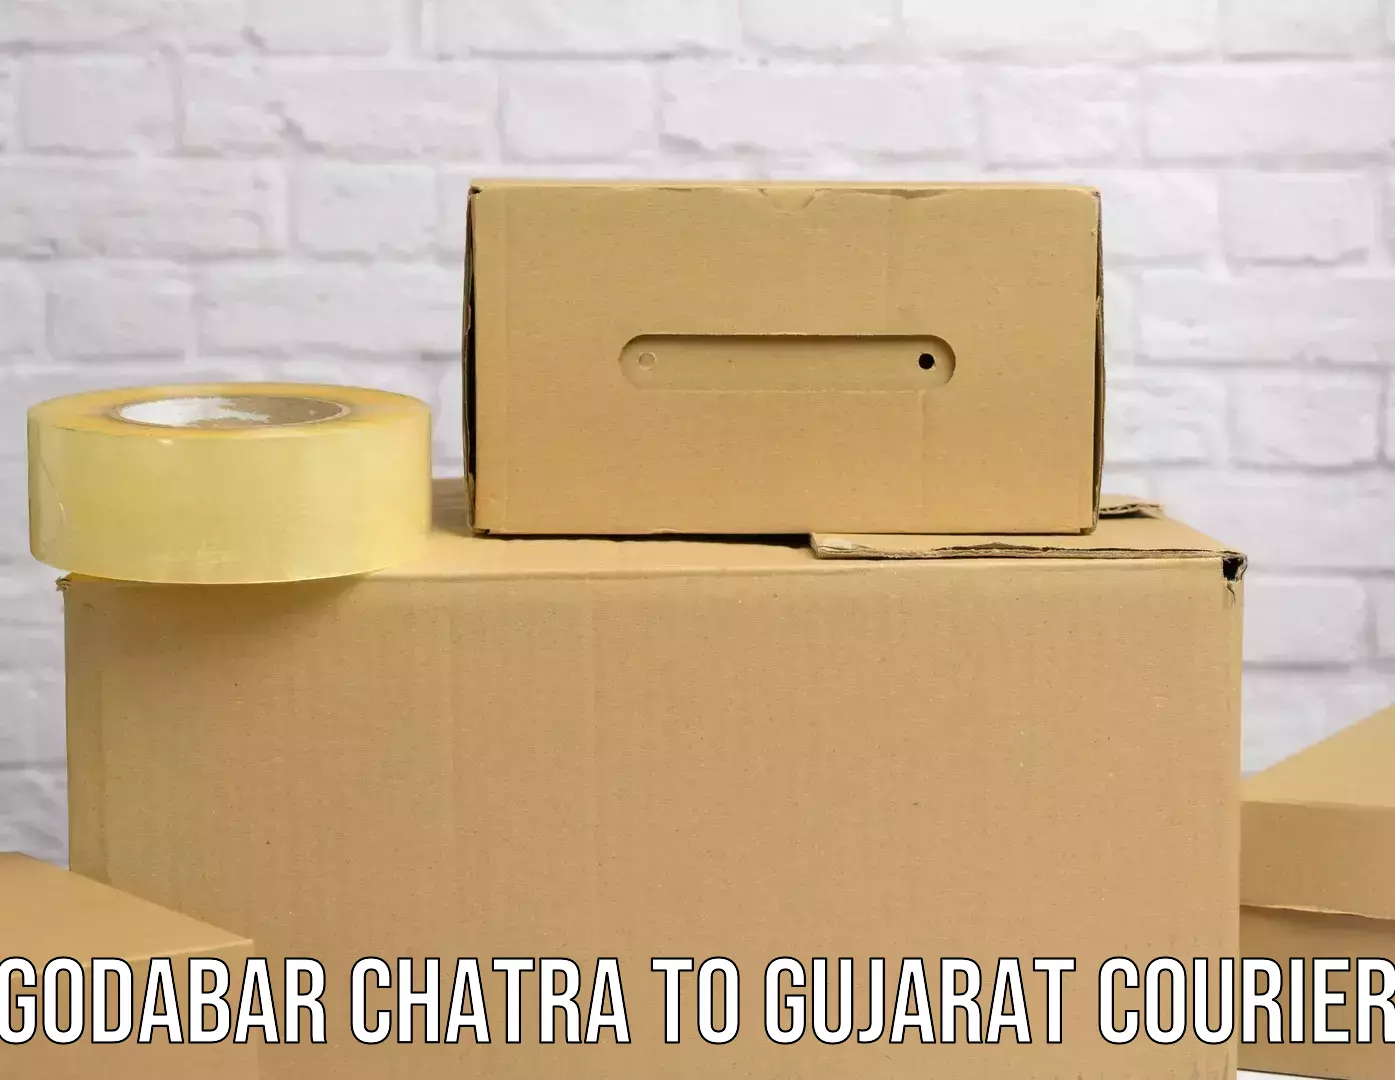 Full-service courier options Godabar Chatra to Dang